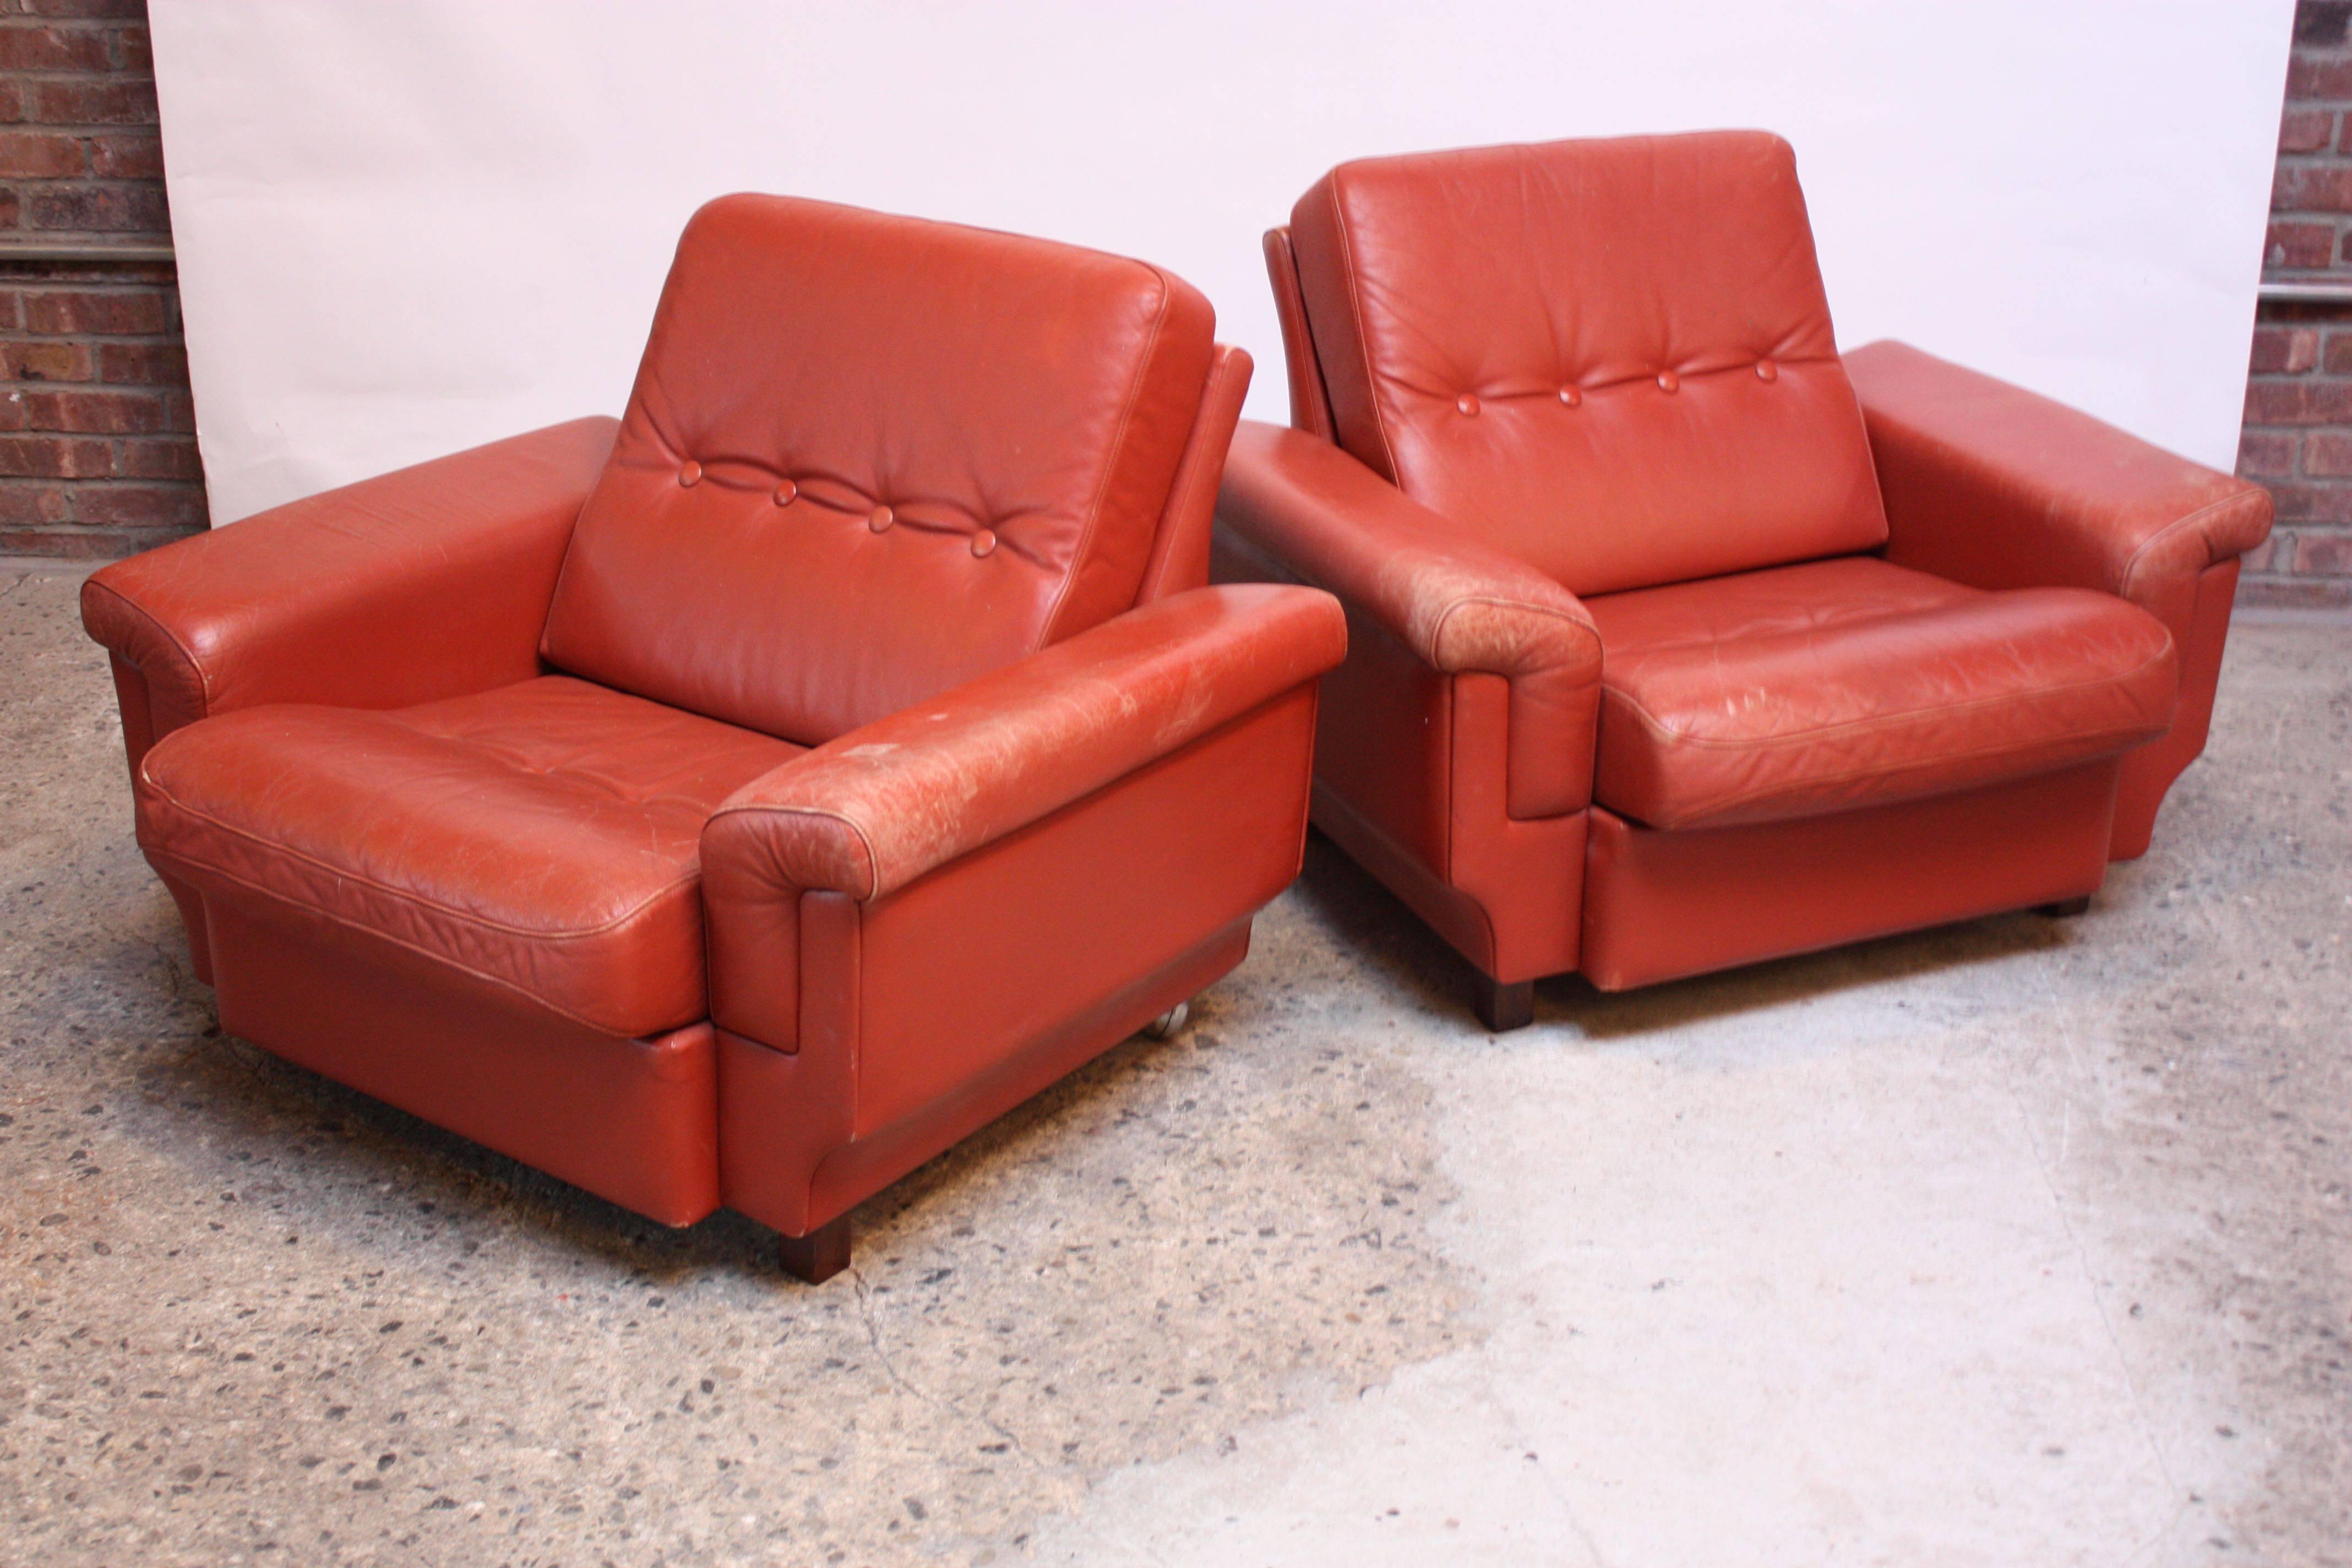 Nicely worn leather lounge chairs in dark coral (Denmark, circa 1970s) composed of two stained mahogany 'block' feet in the front and two caster wheels in the back ('wheelbarrow' design allows for easy mobility).
Leather is nicely distressed with